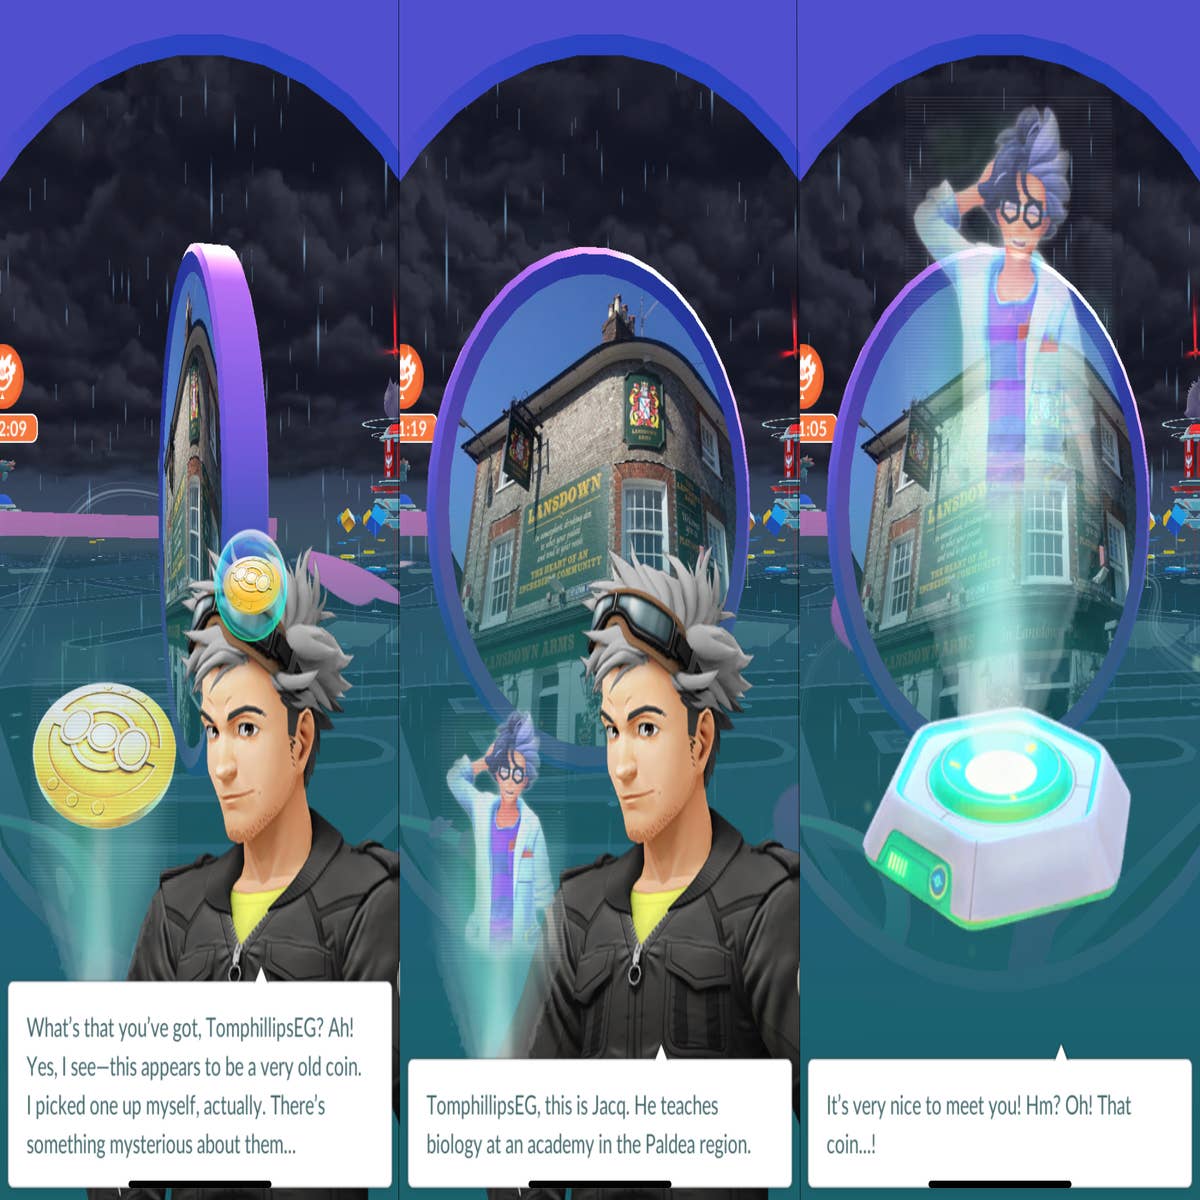 Pokémon GO - Page 39 - Games and Gaming - VillaTalk